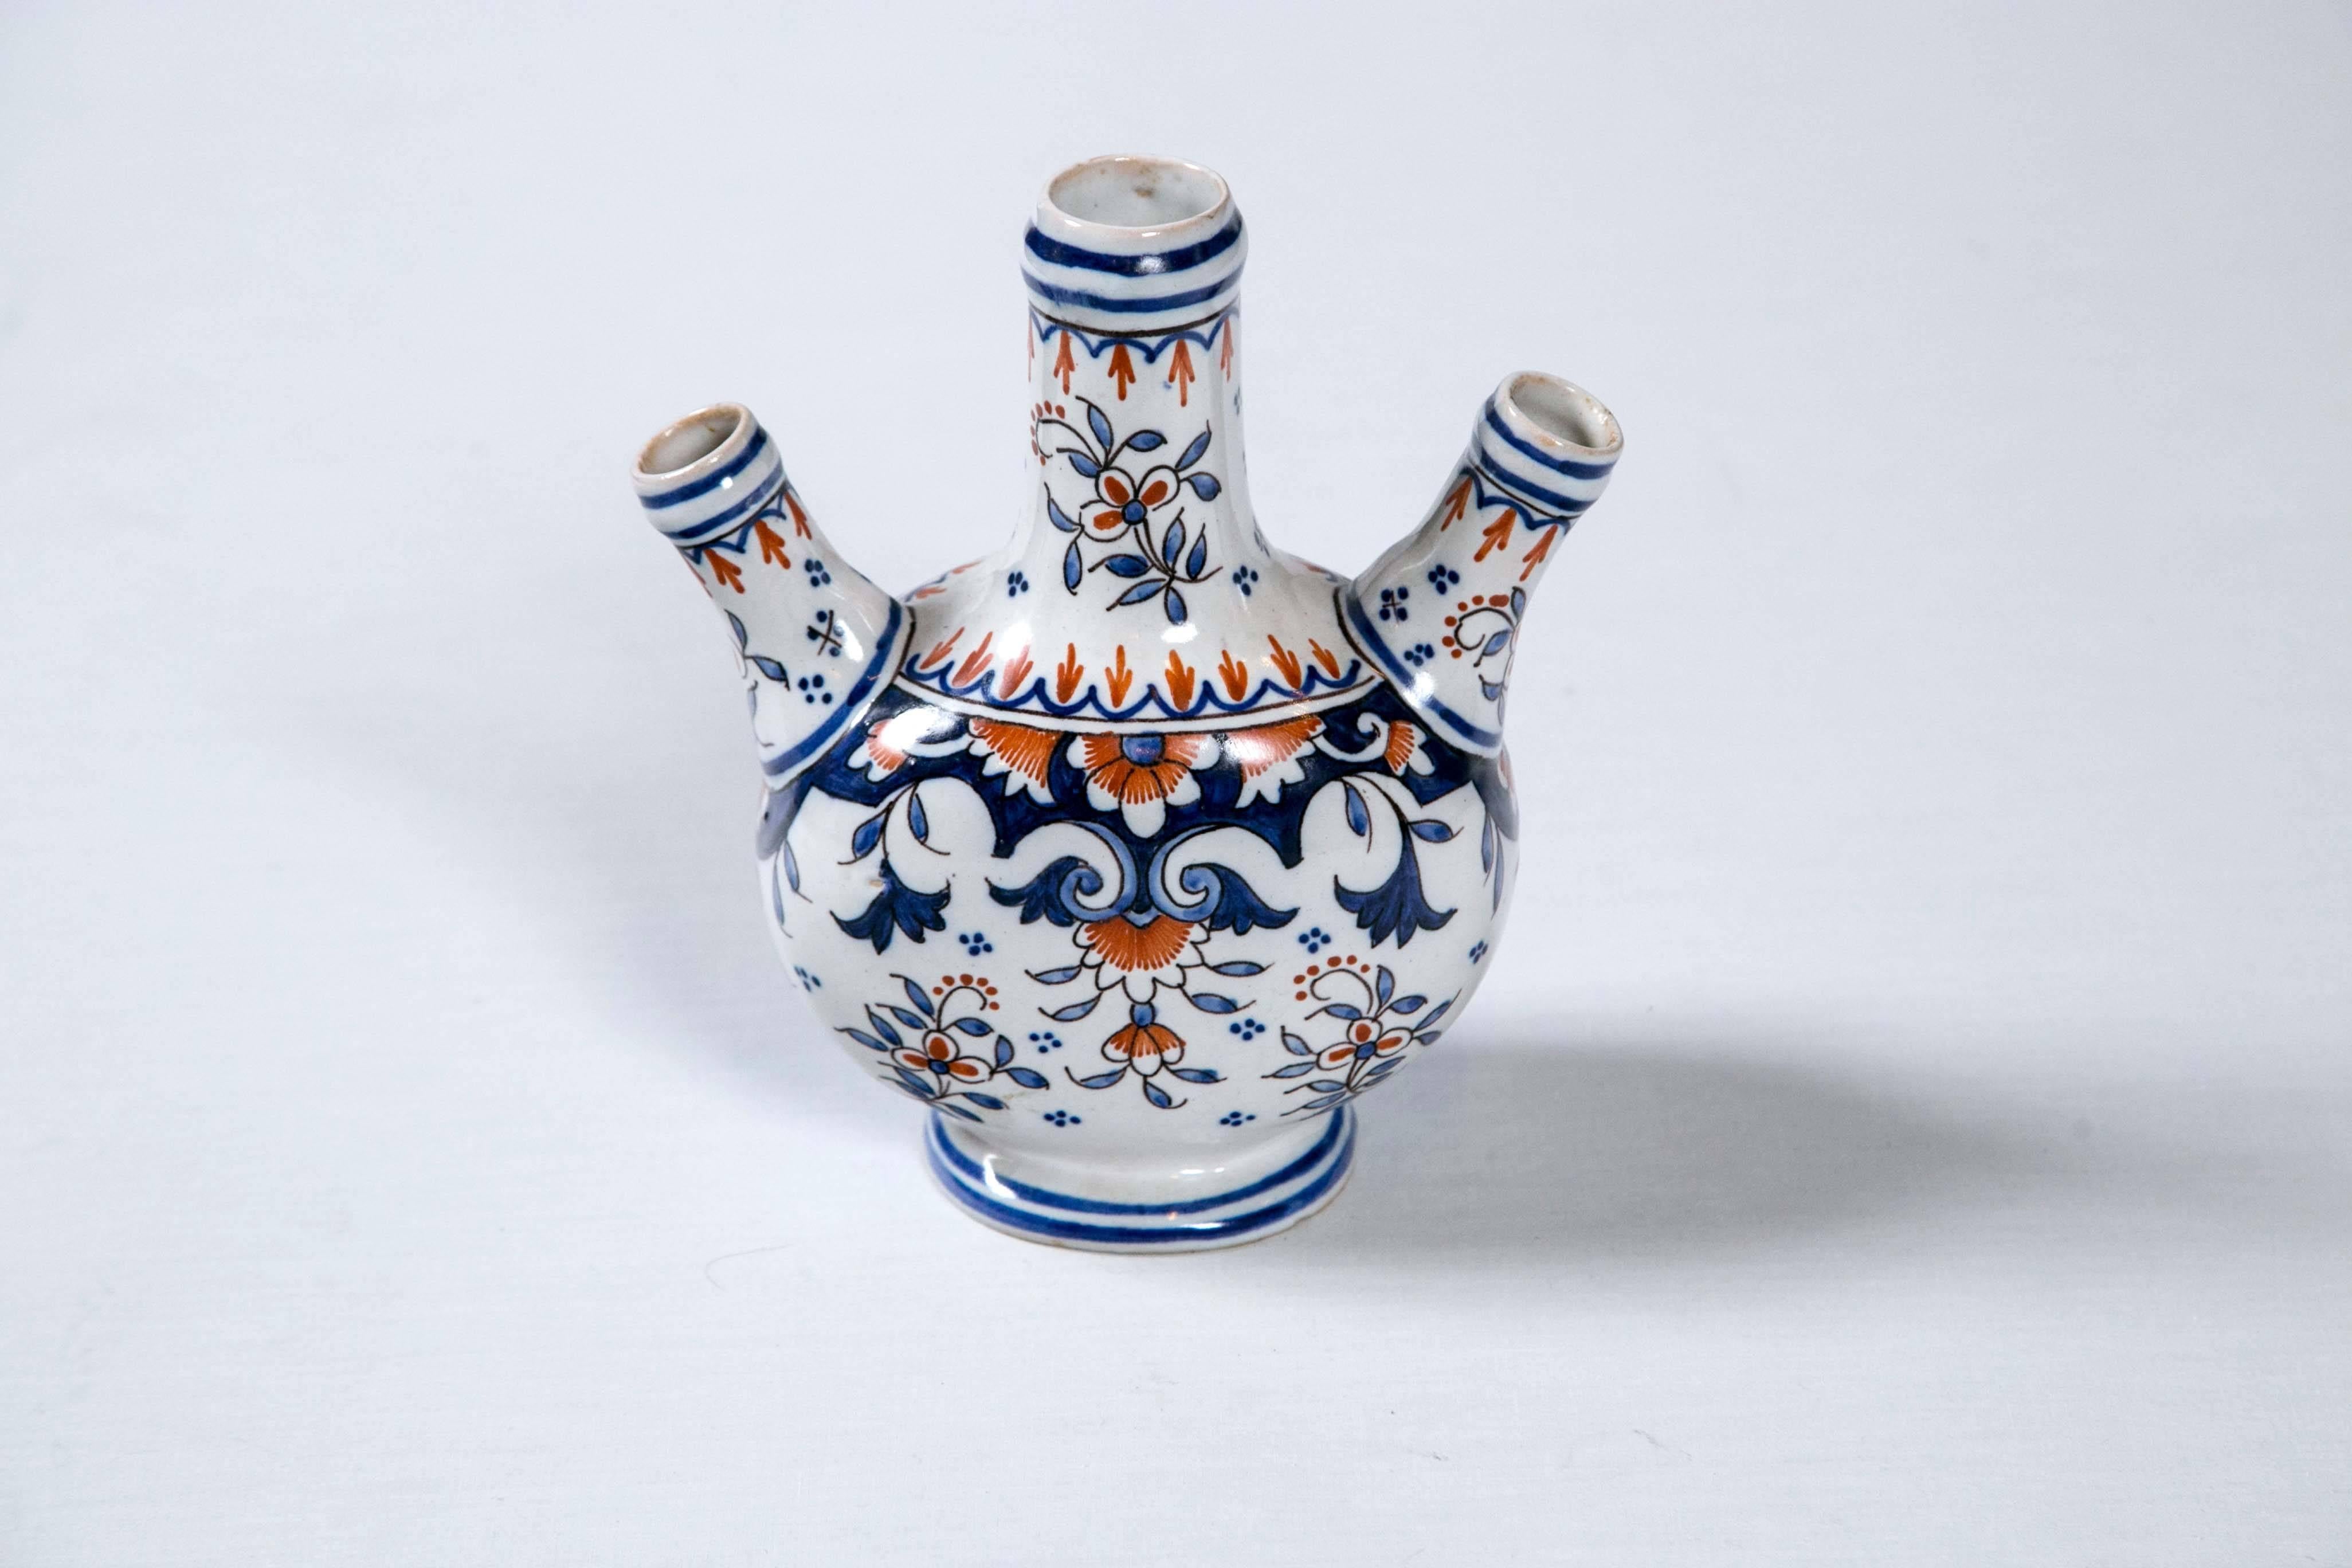 Beautiful Tulipiere vase, circa 1900, Rouen, France. Three separate spouts for flowers. Traditional orange, blue and white pattern of Rouen.